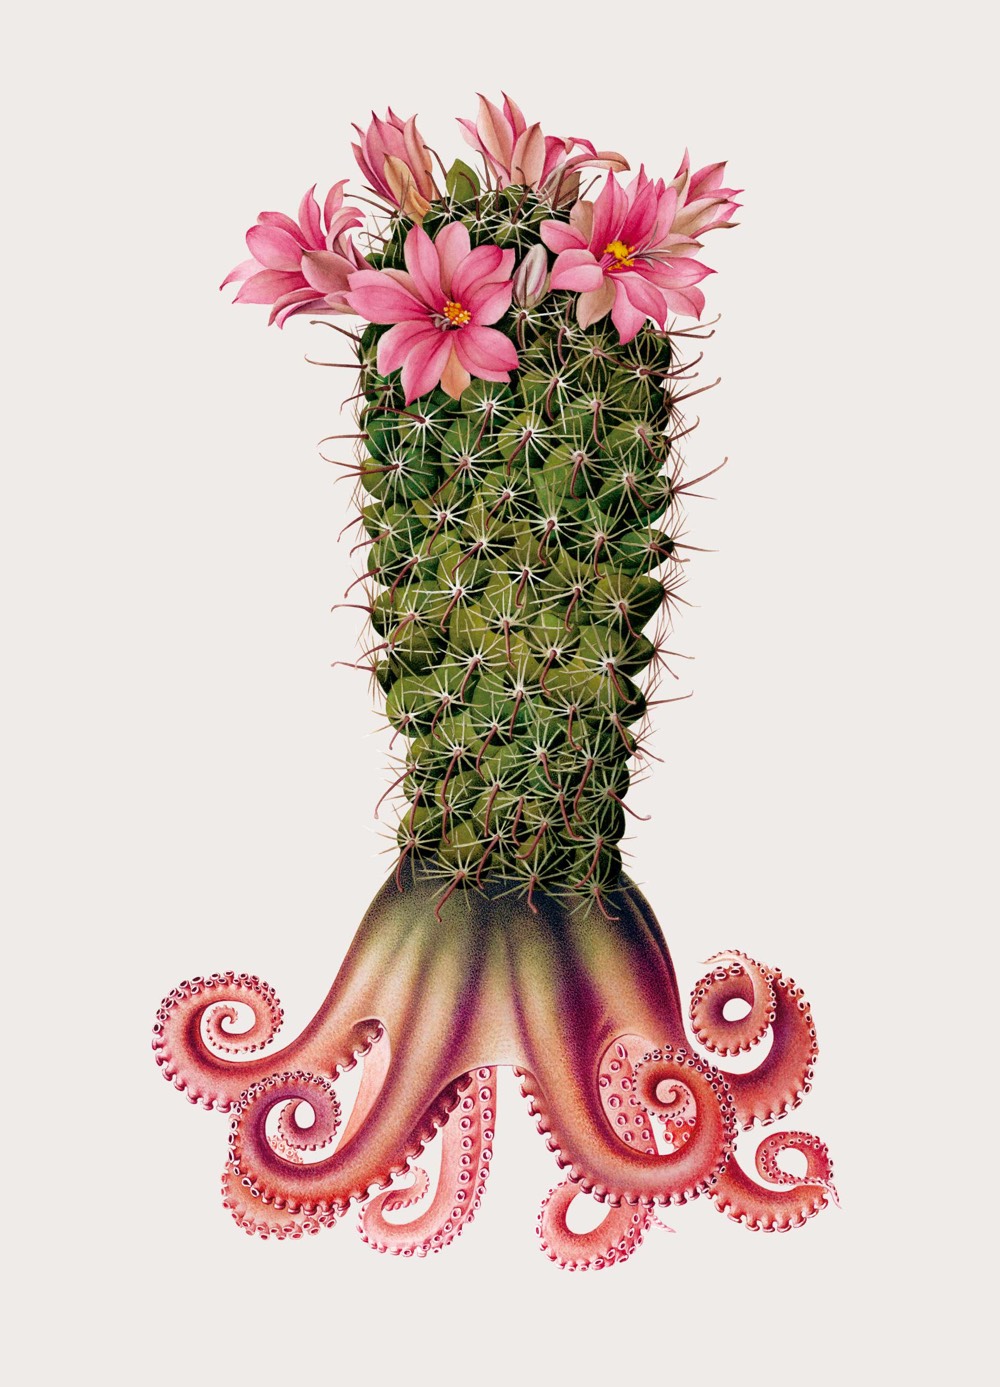 An old fashioned textbook-style illustration of a specimen, except this one is imaginary: it looks like an octopus, except the body is a cactus with a flower on top.